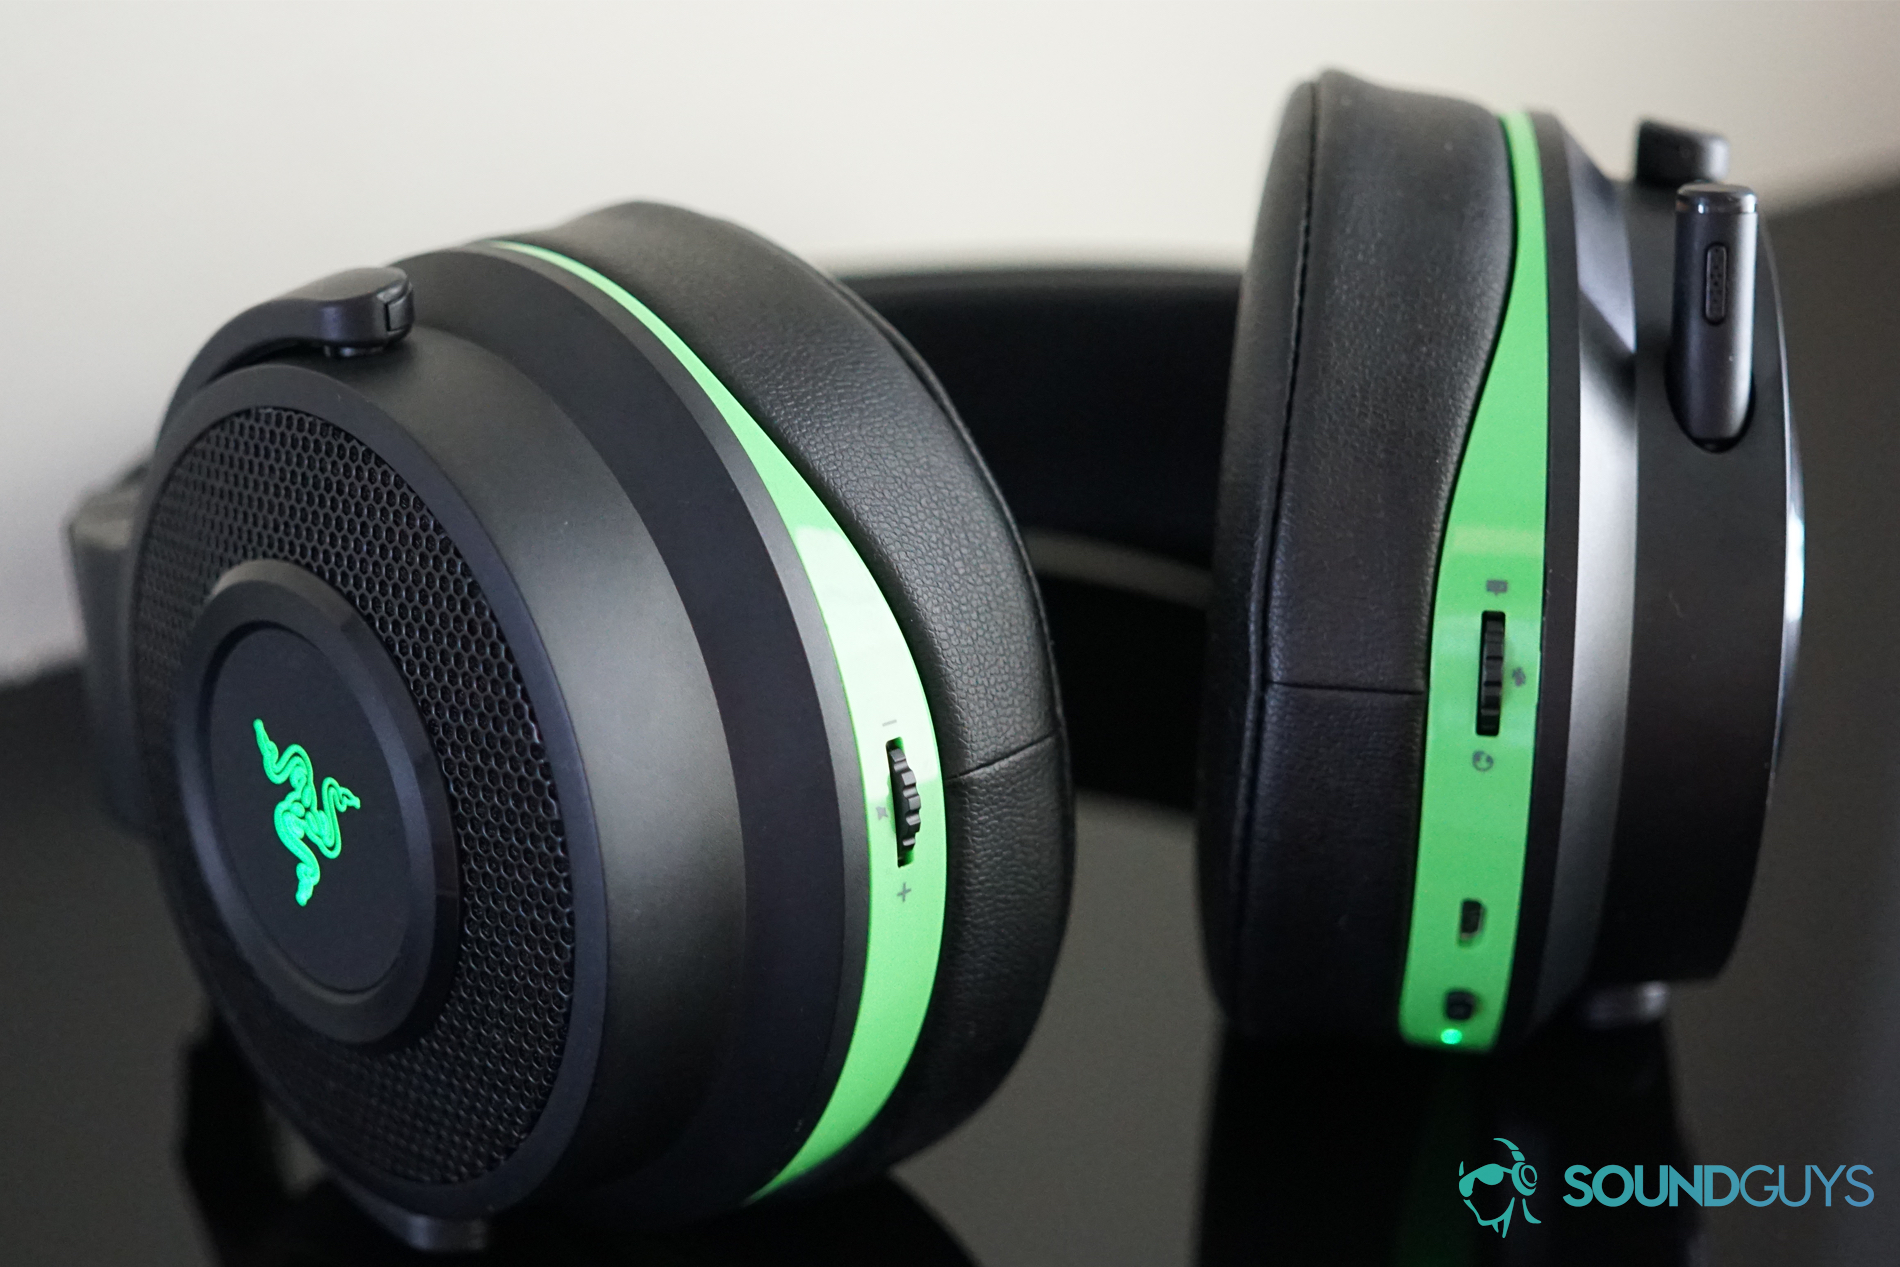 A close-up shot of the bottom edge of the Razer Thresher Ultimate gaming headset, which shows its on-ear controls.